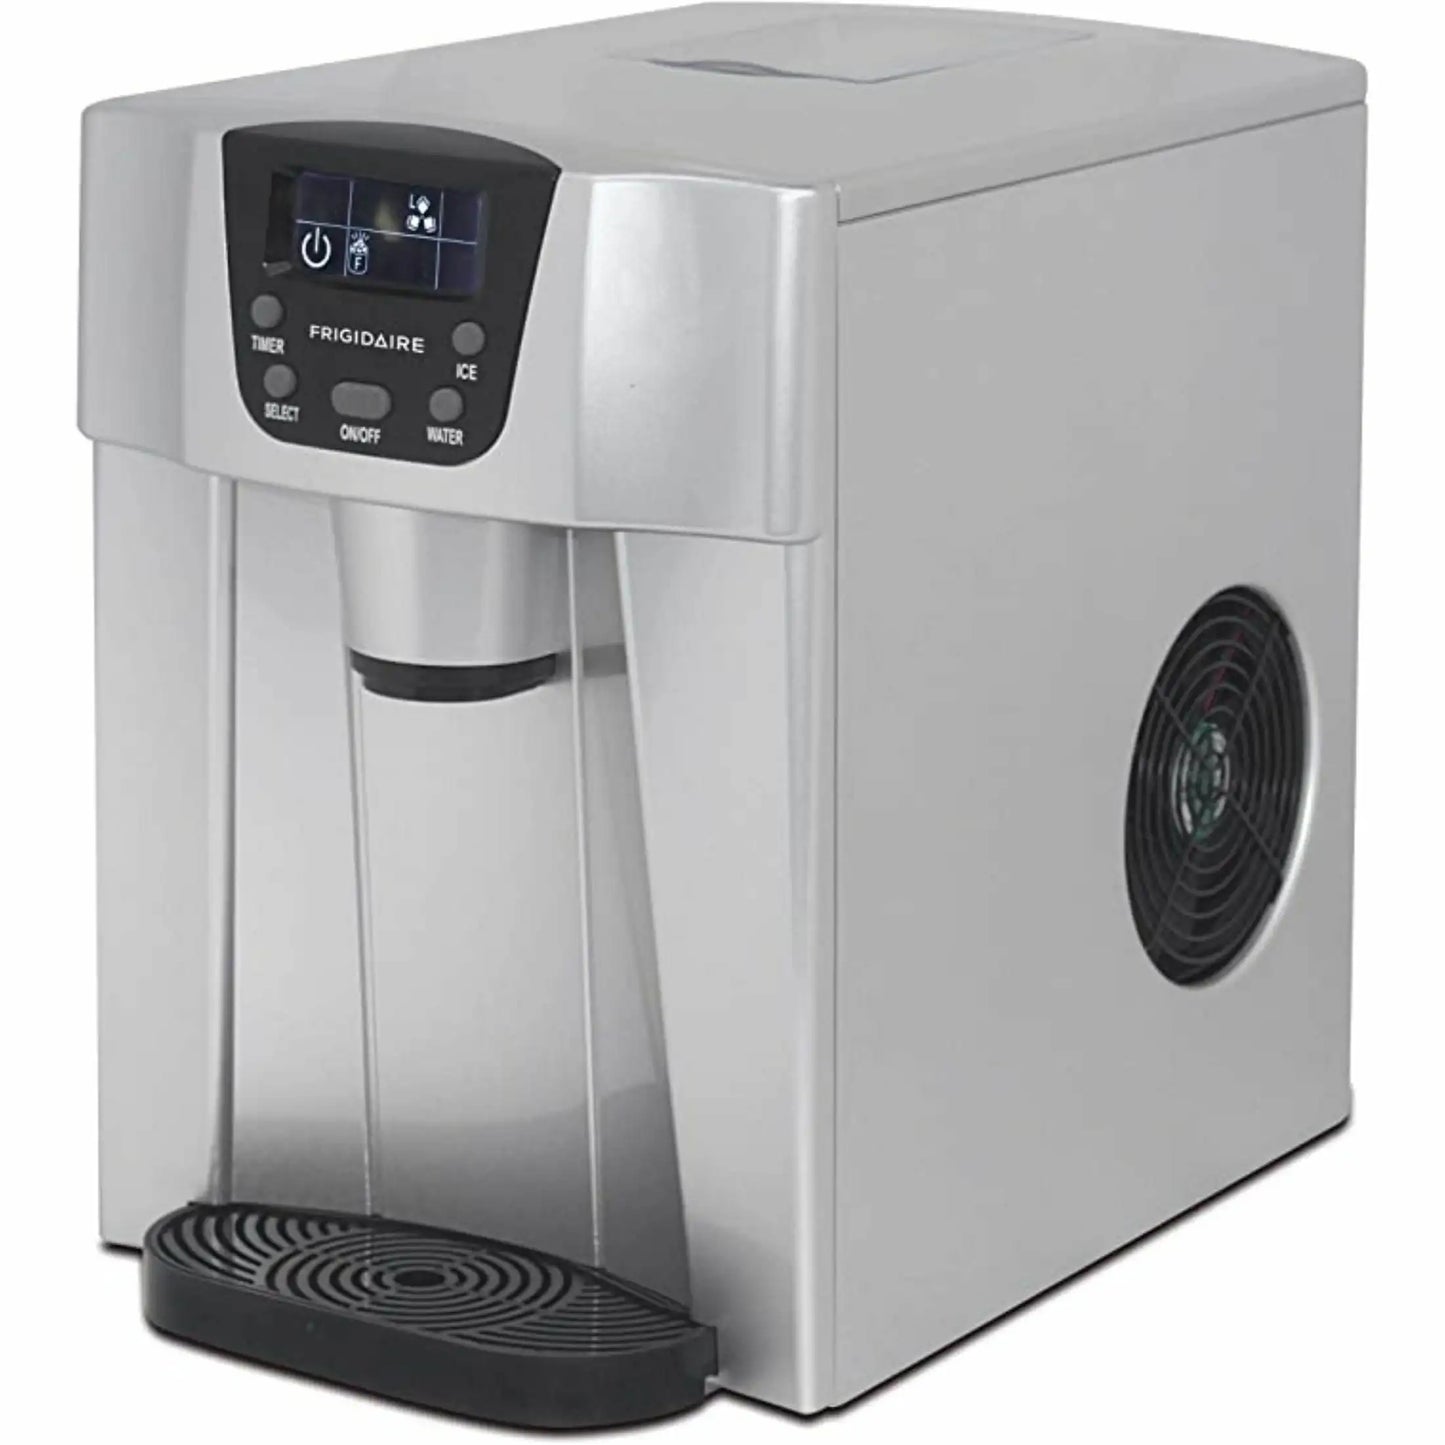 Frigidaire 26 lbs Countertop Ice Maker with 2L Water Dispenser - Silver